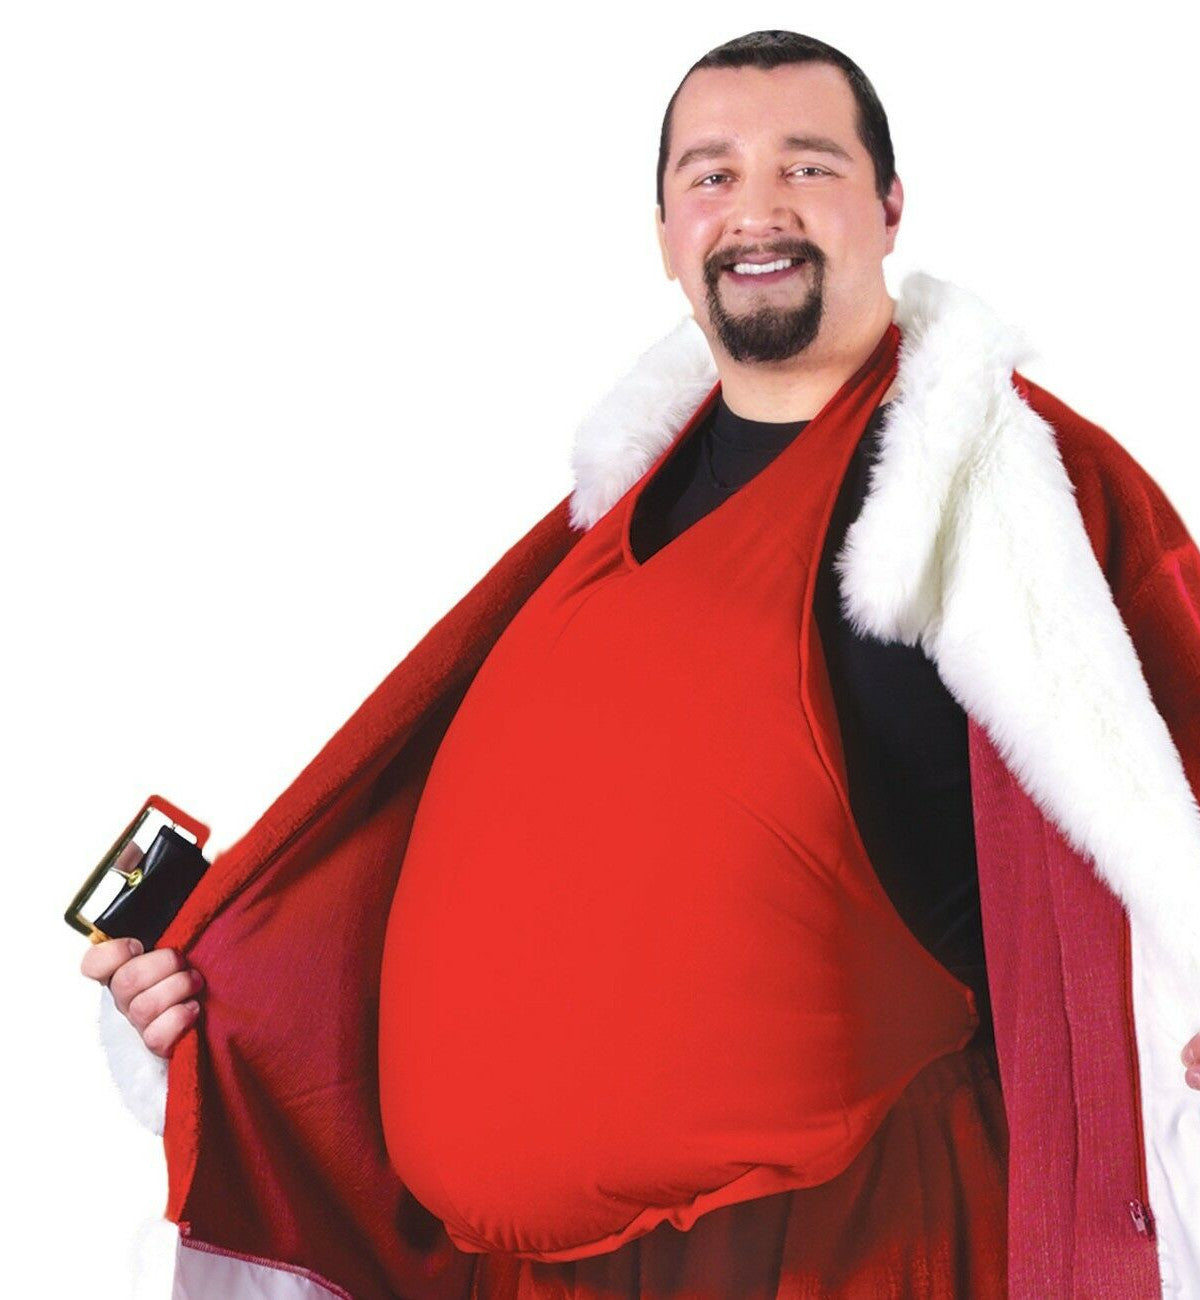 Santa Clause Padded Belly Stomach Stuffer Adult Costume Accessory A fully padded belly and chest with strap in the back